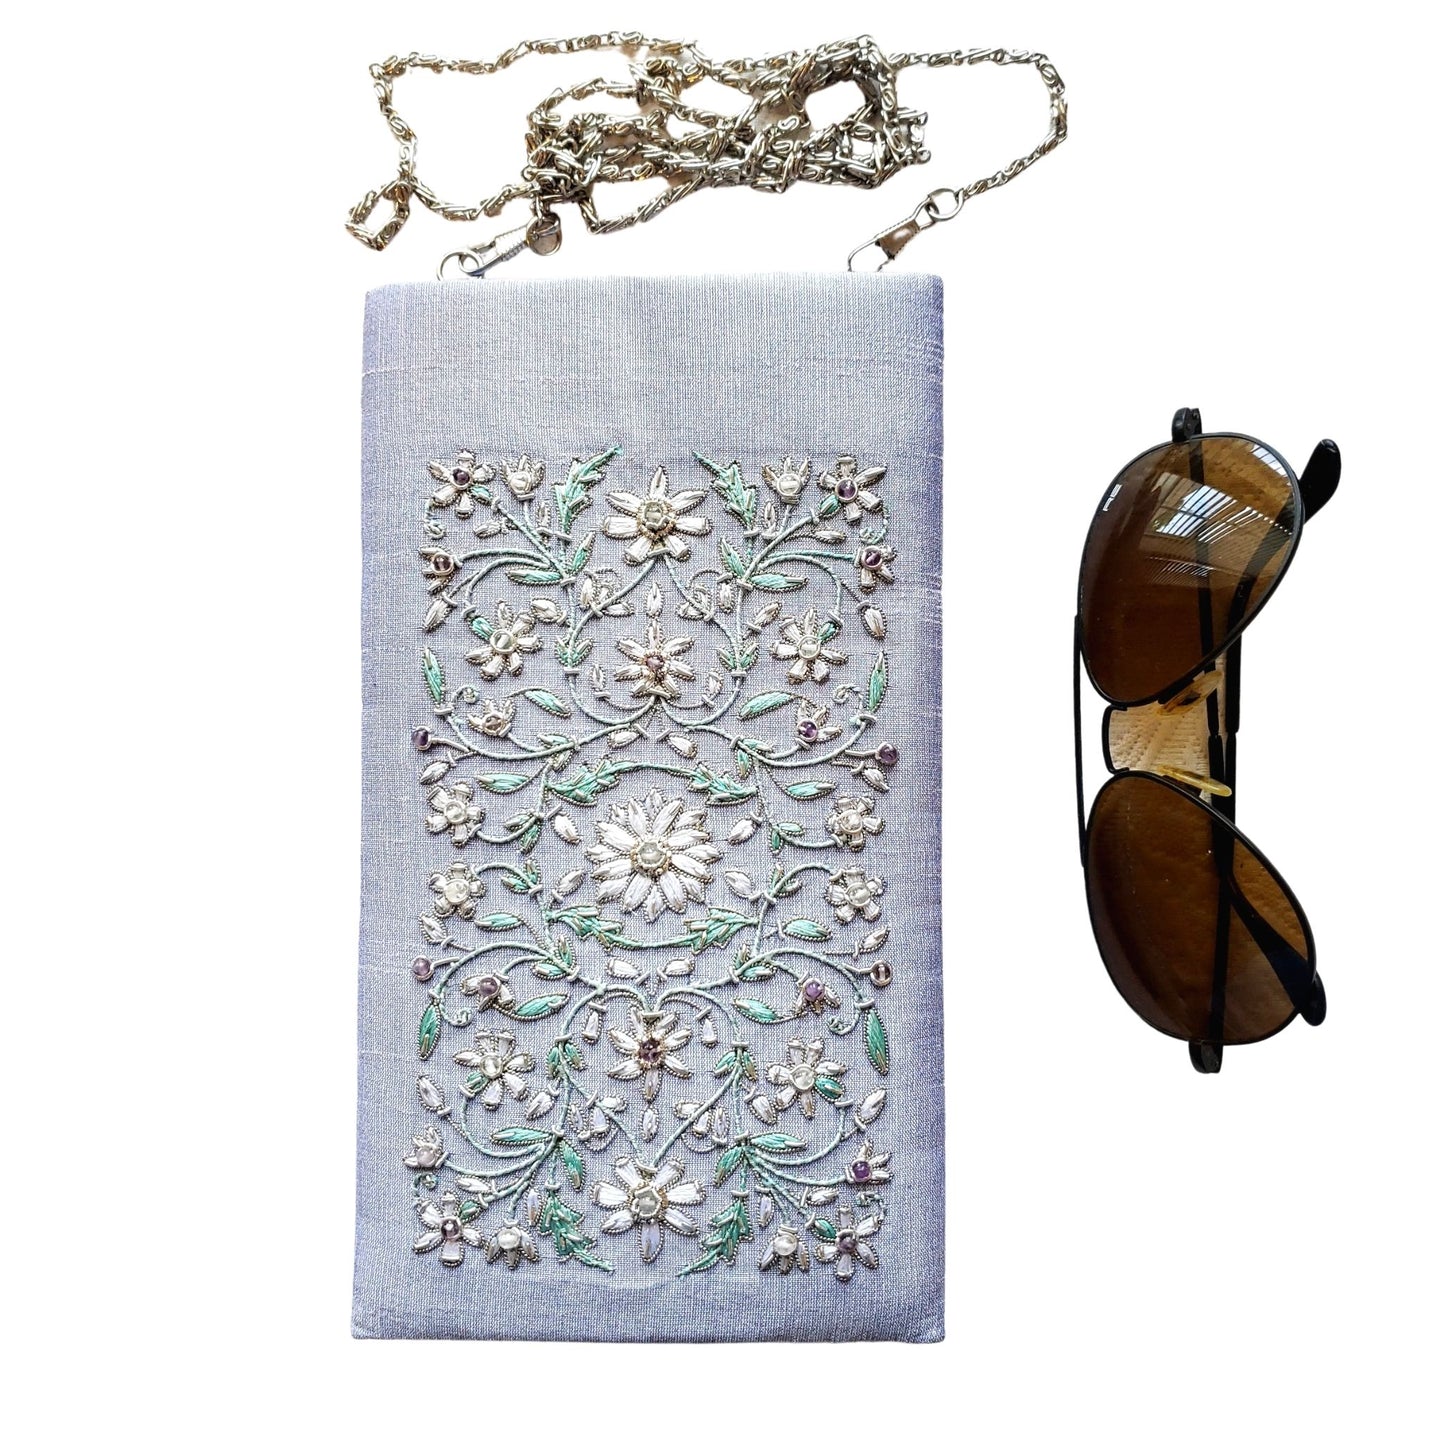 Gray lavender soft eyeglasses case embroidered with white flowers. 